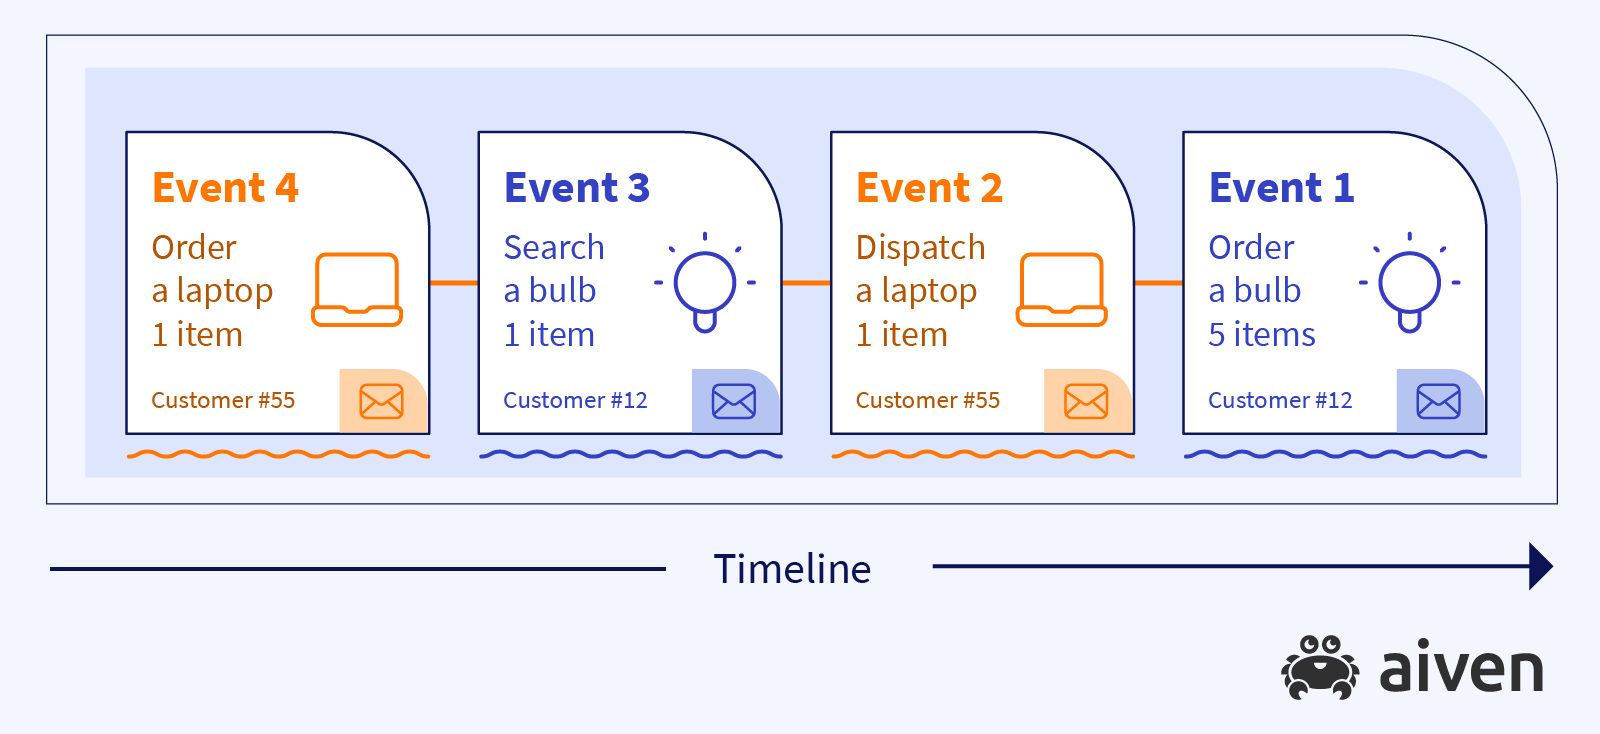 Events occur along a timeline. Event 1 is customer 55 orders a laptop, Event 2 is customer 12 searches for a bulb, Event 3 is dispatch a laptop to customer 55, Event 4 is customer 12 orders 5 bulbs